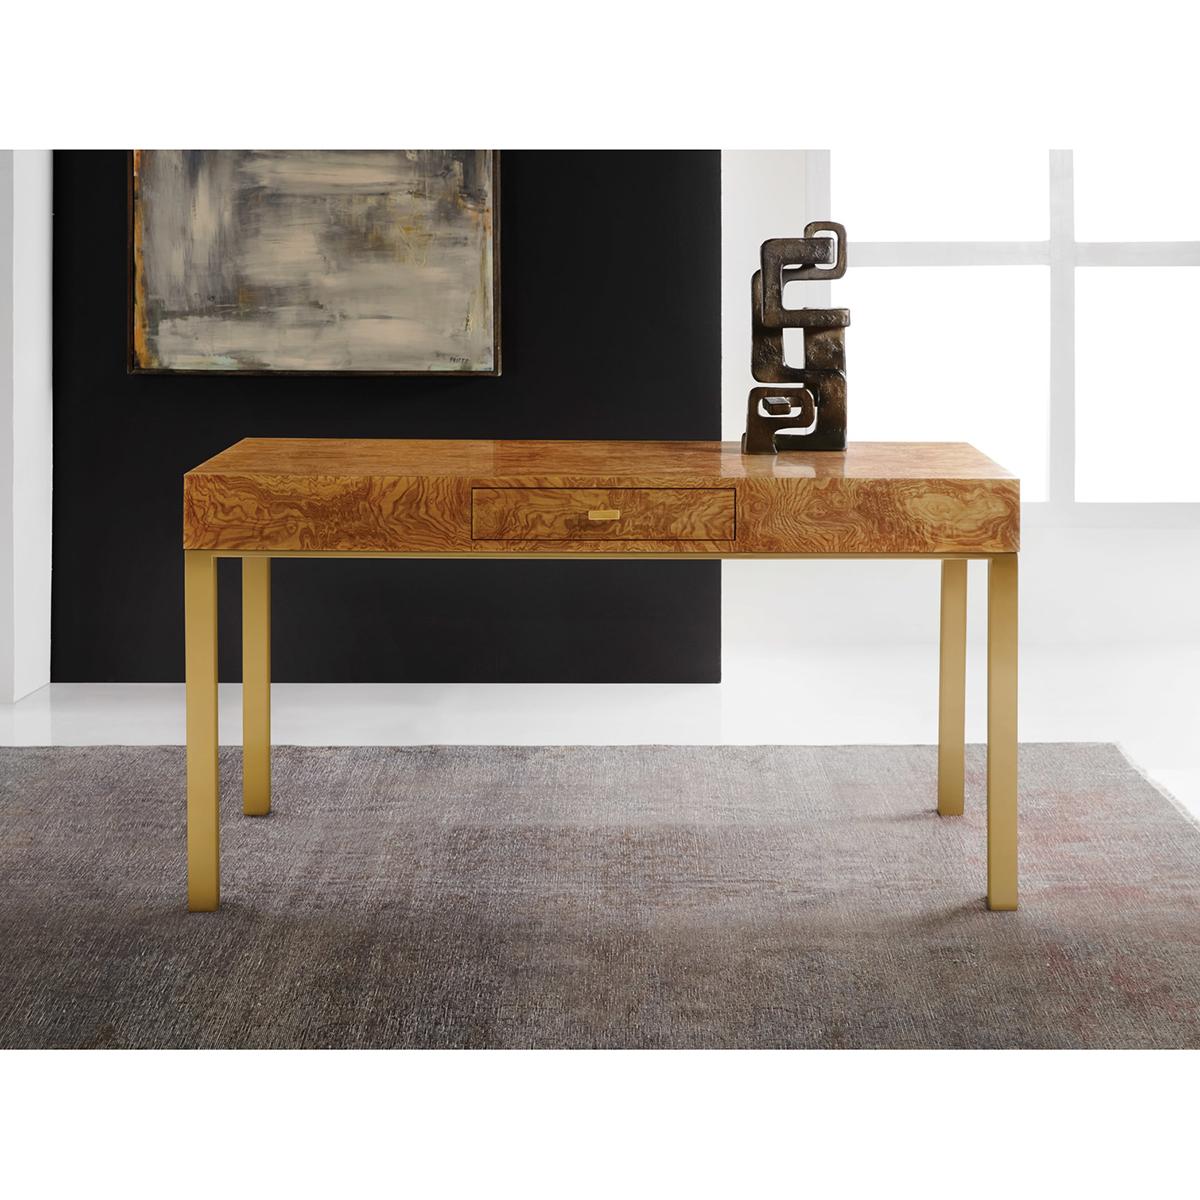 Midcentury Burl Desk with an exotic Olive Ash burl veneer top, with a solid oak working pencil drawer and raised on a brass finished modern four straight leg base. 

Dimensions: 60